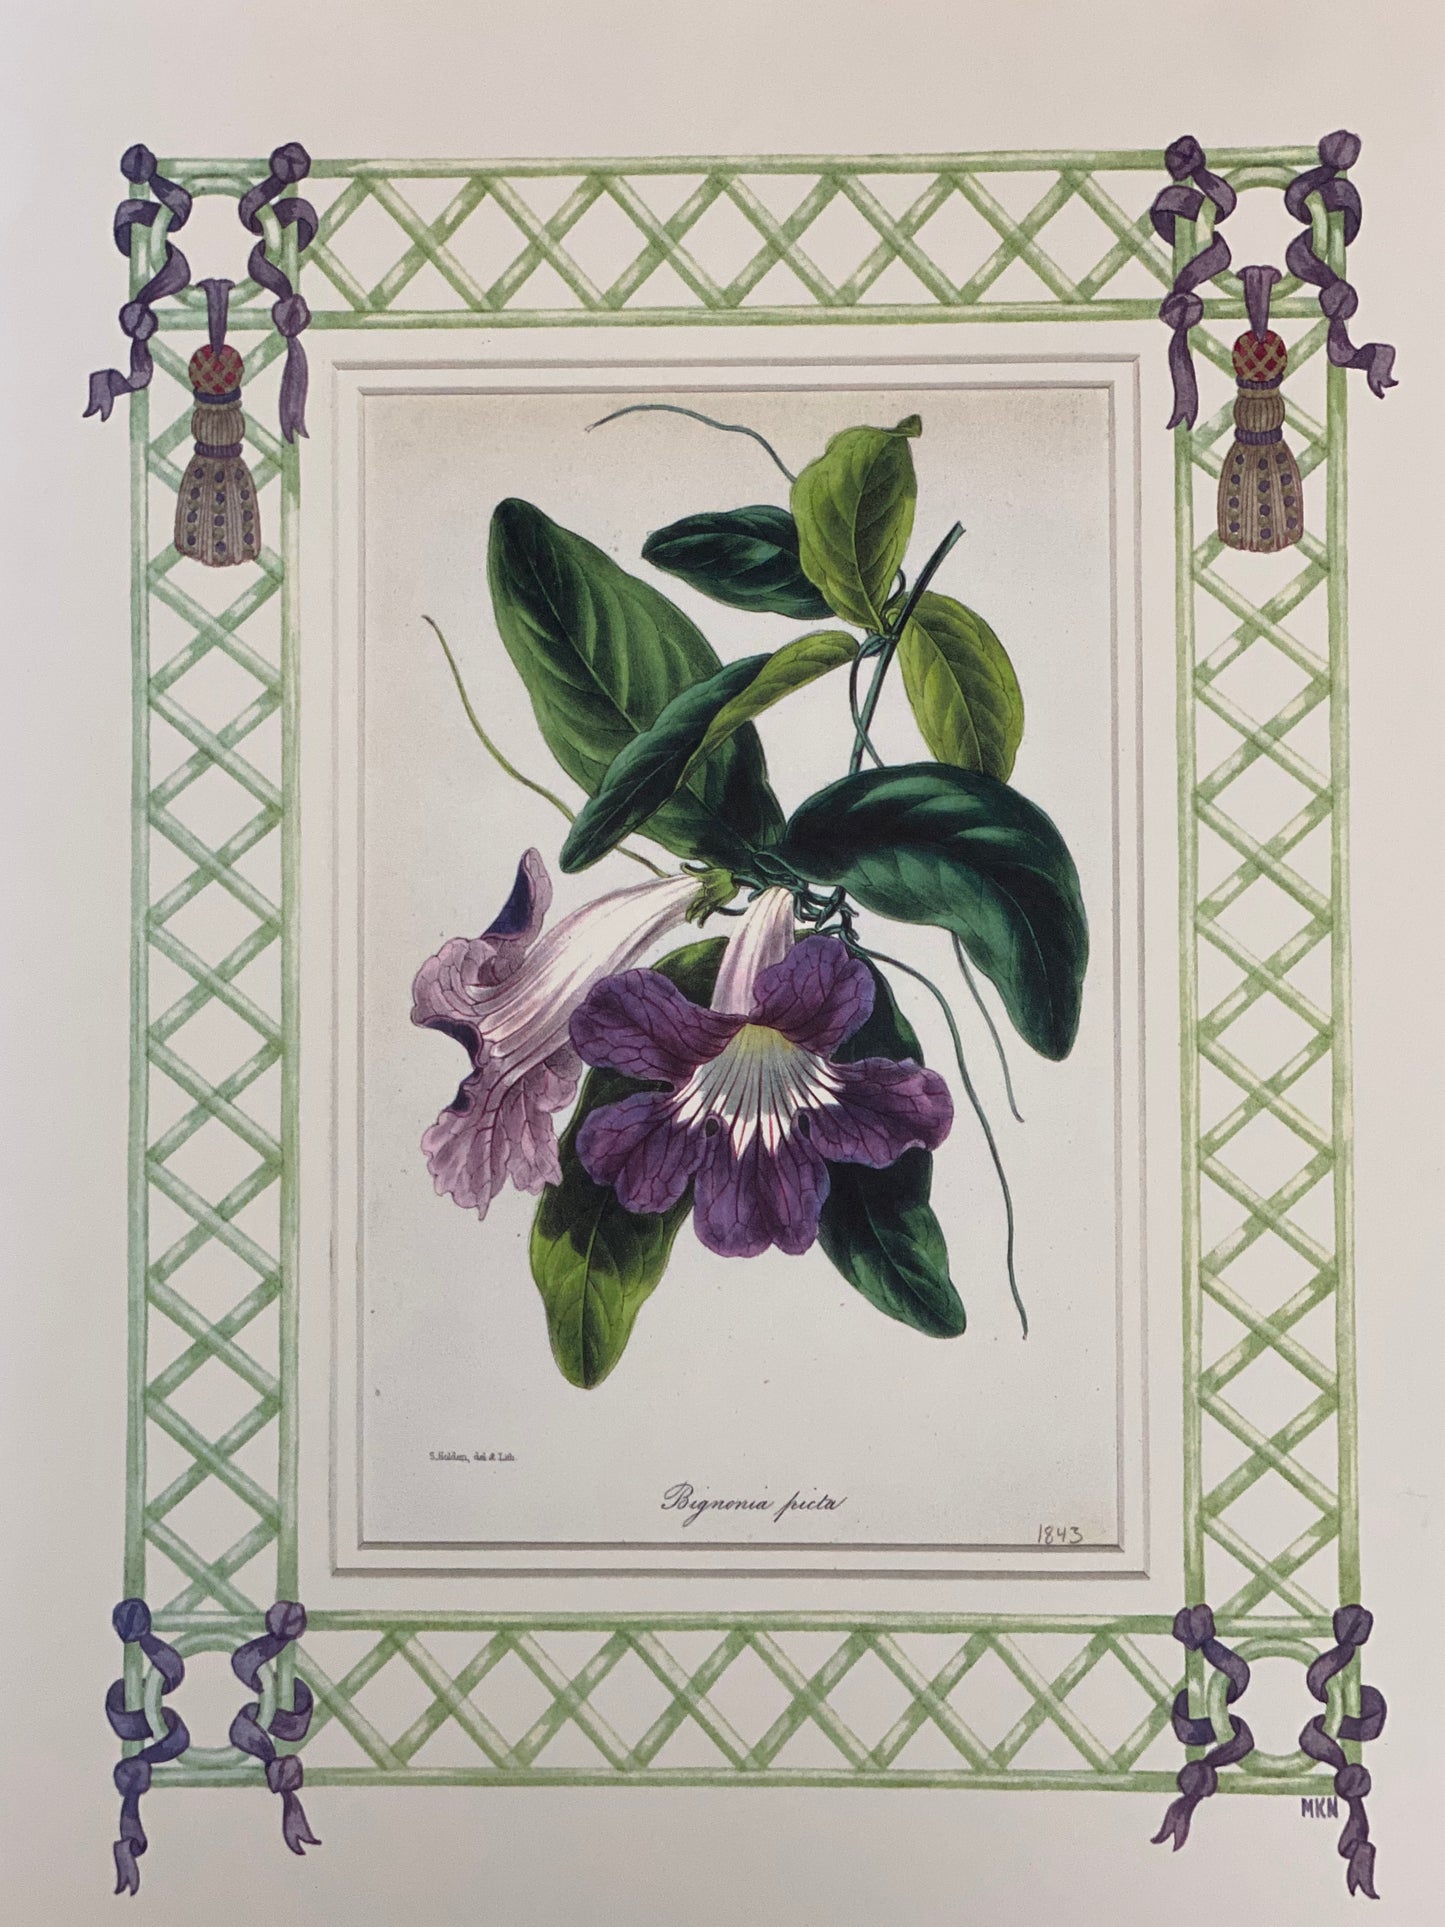 Begonia antique print with hand-painted lattice border